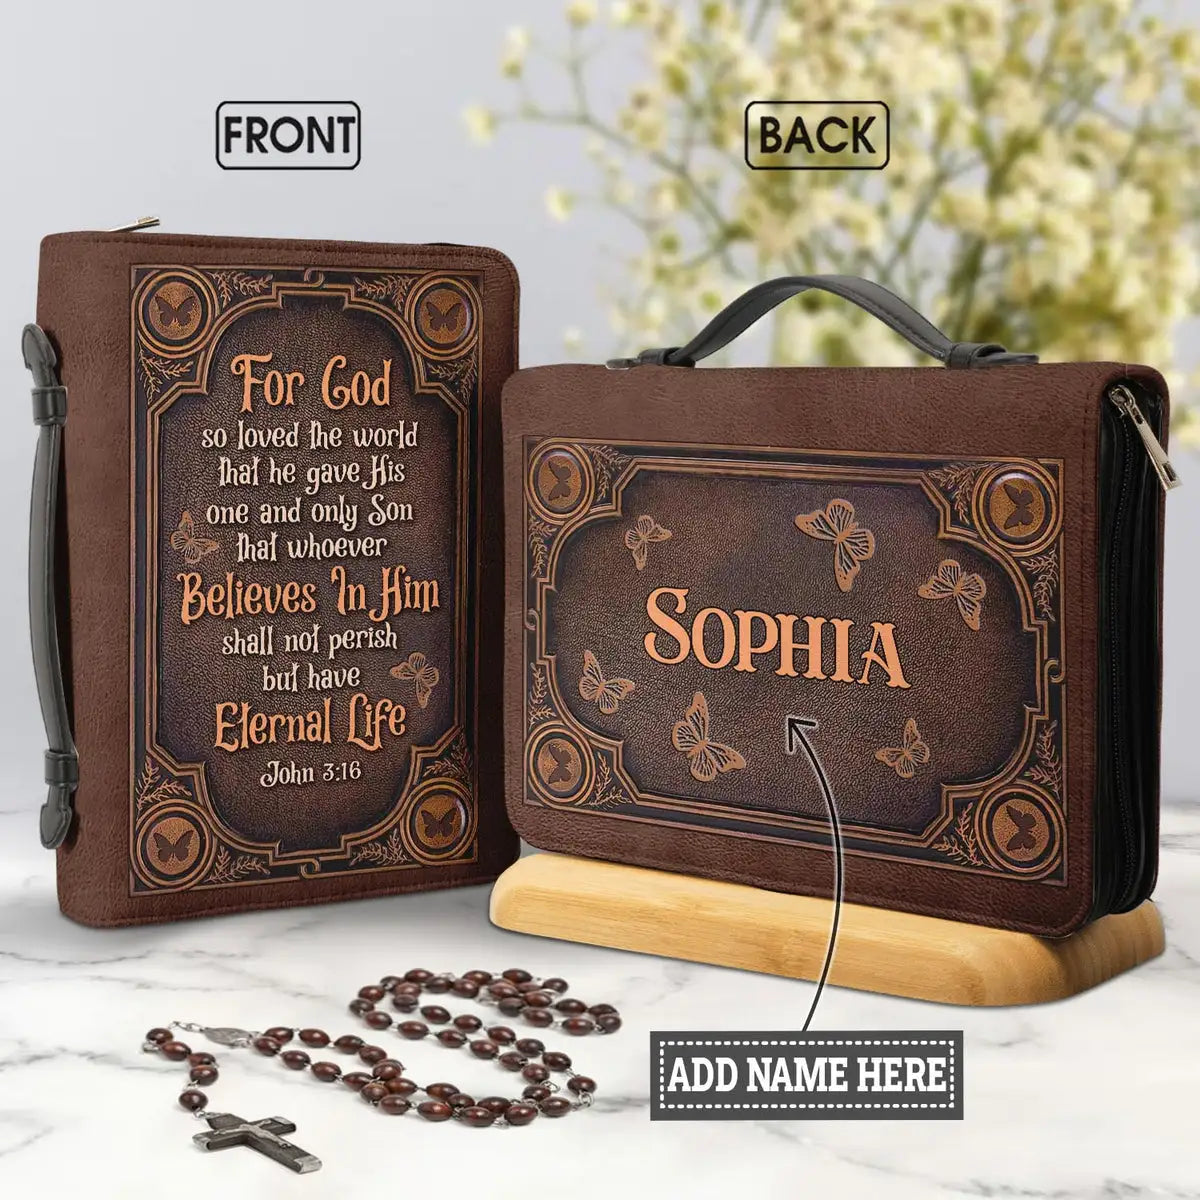 God So Loved Butterfly Pattern Bible Bag Ladies PU Leather Bible Cover Zipper Totes Bags Stylish Convenient Bible Case Journal Storage Handbags